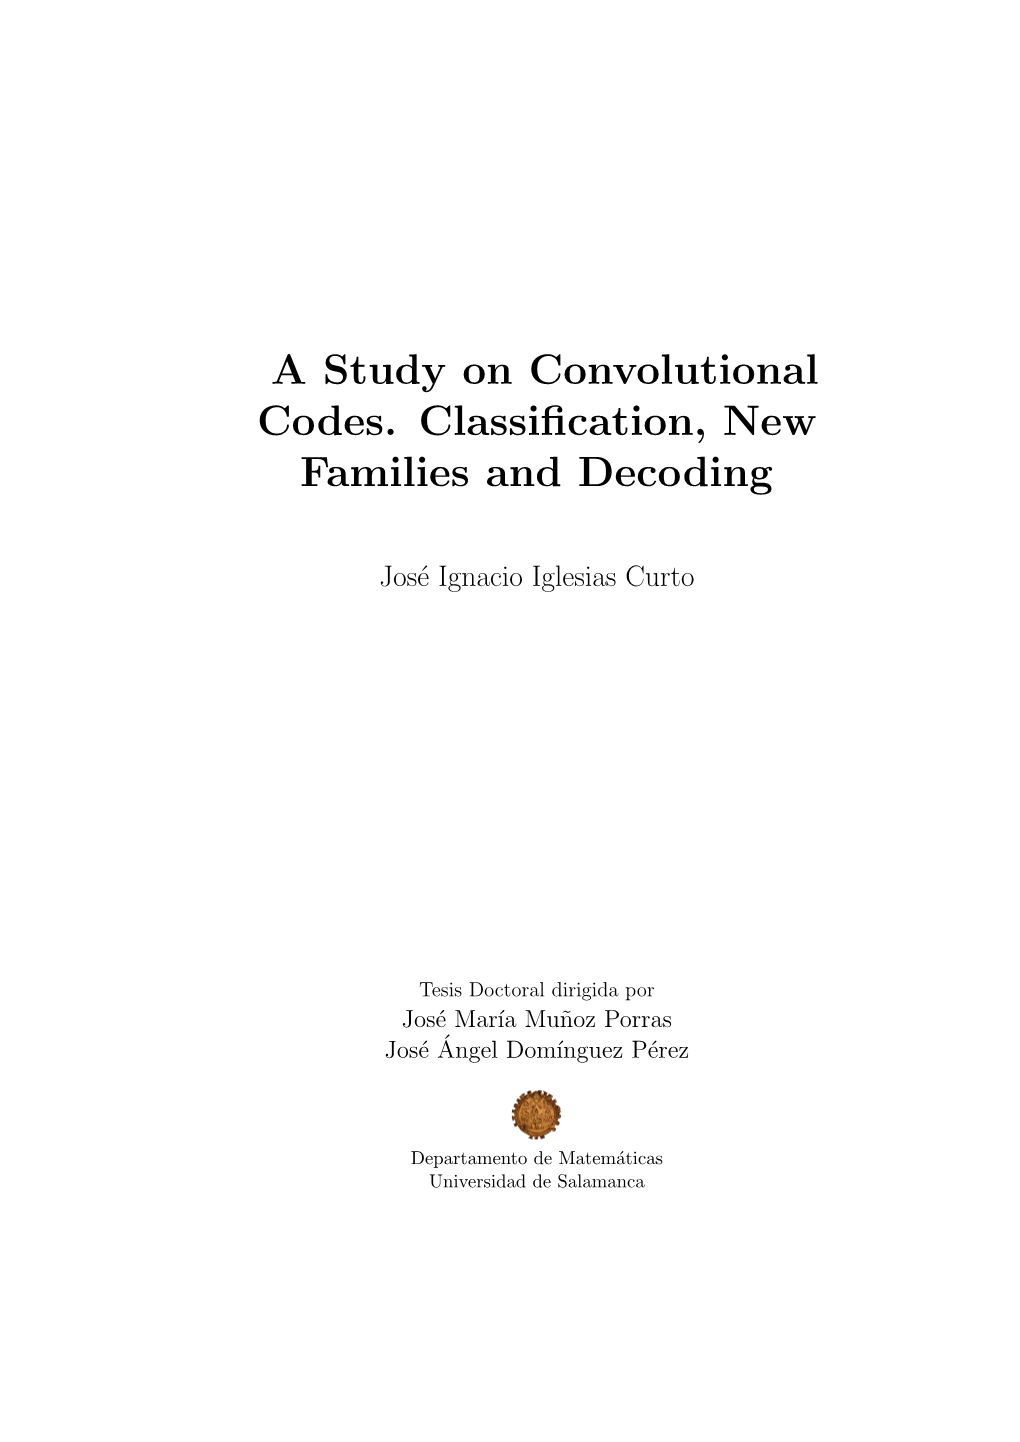 A Study on Convolutional Codes. Classification, New Families And